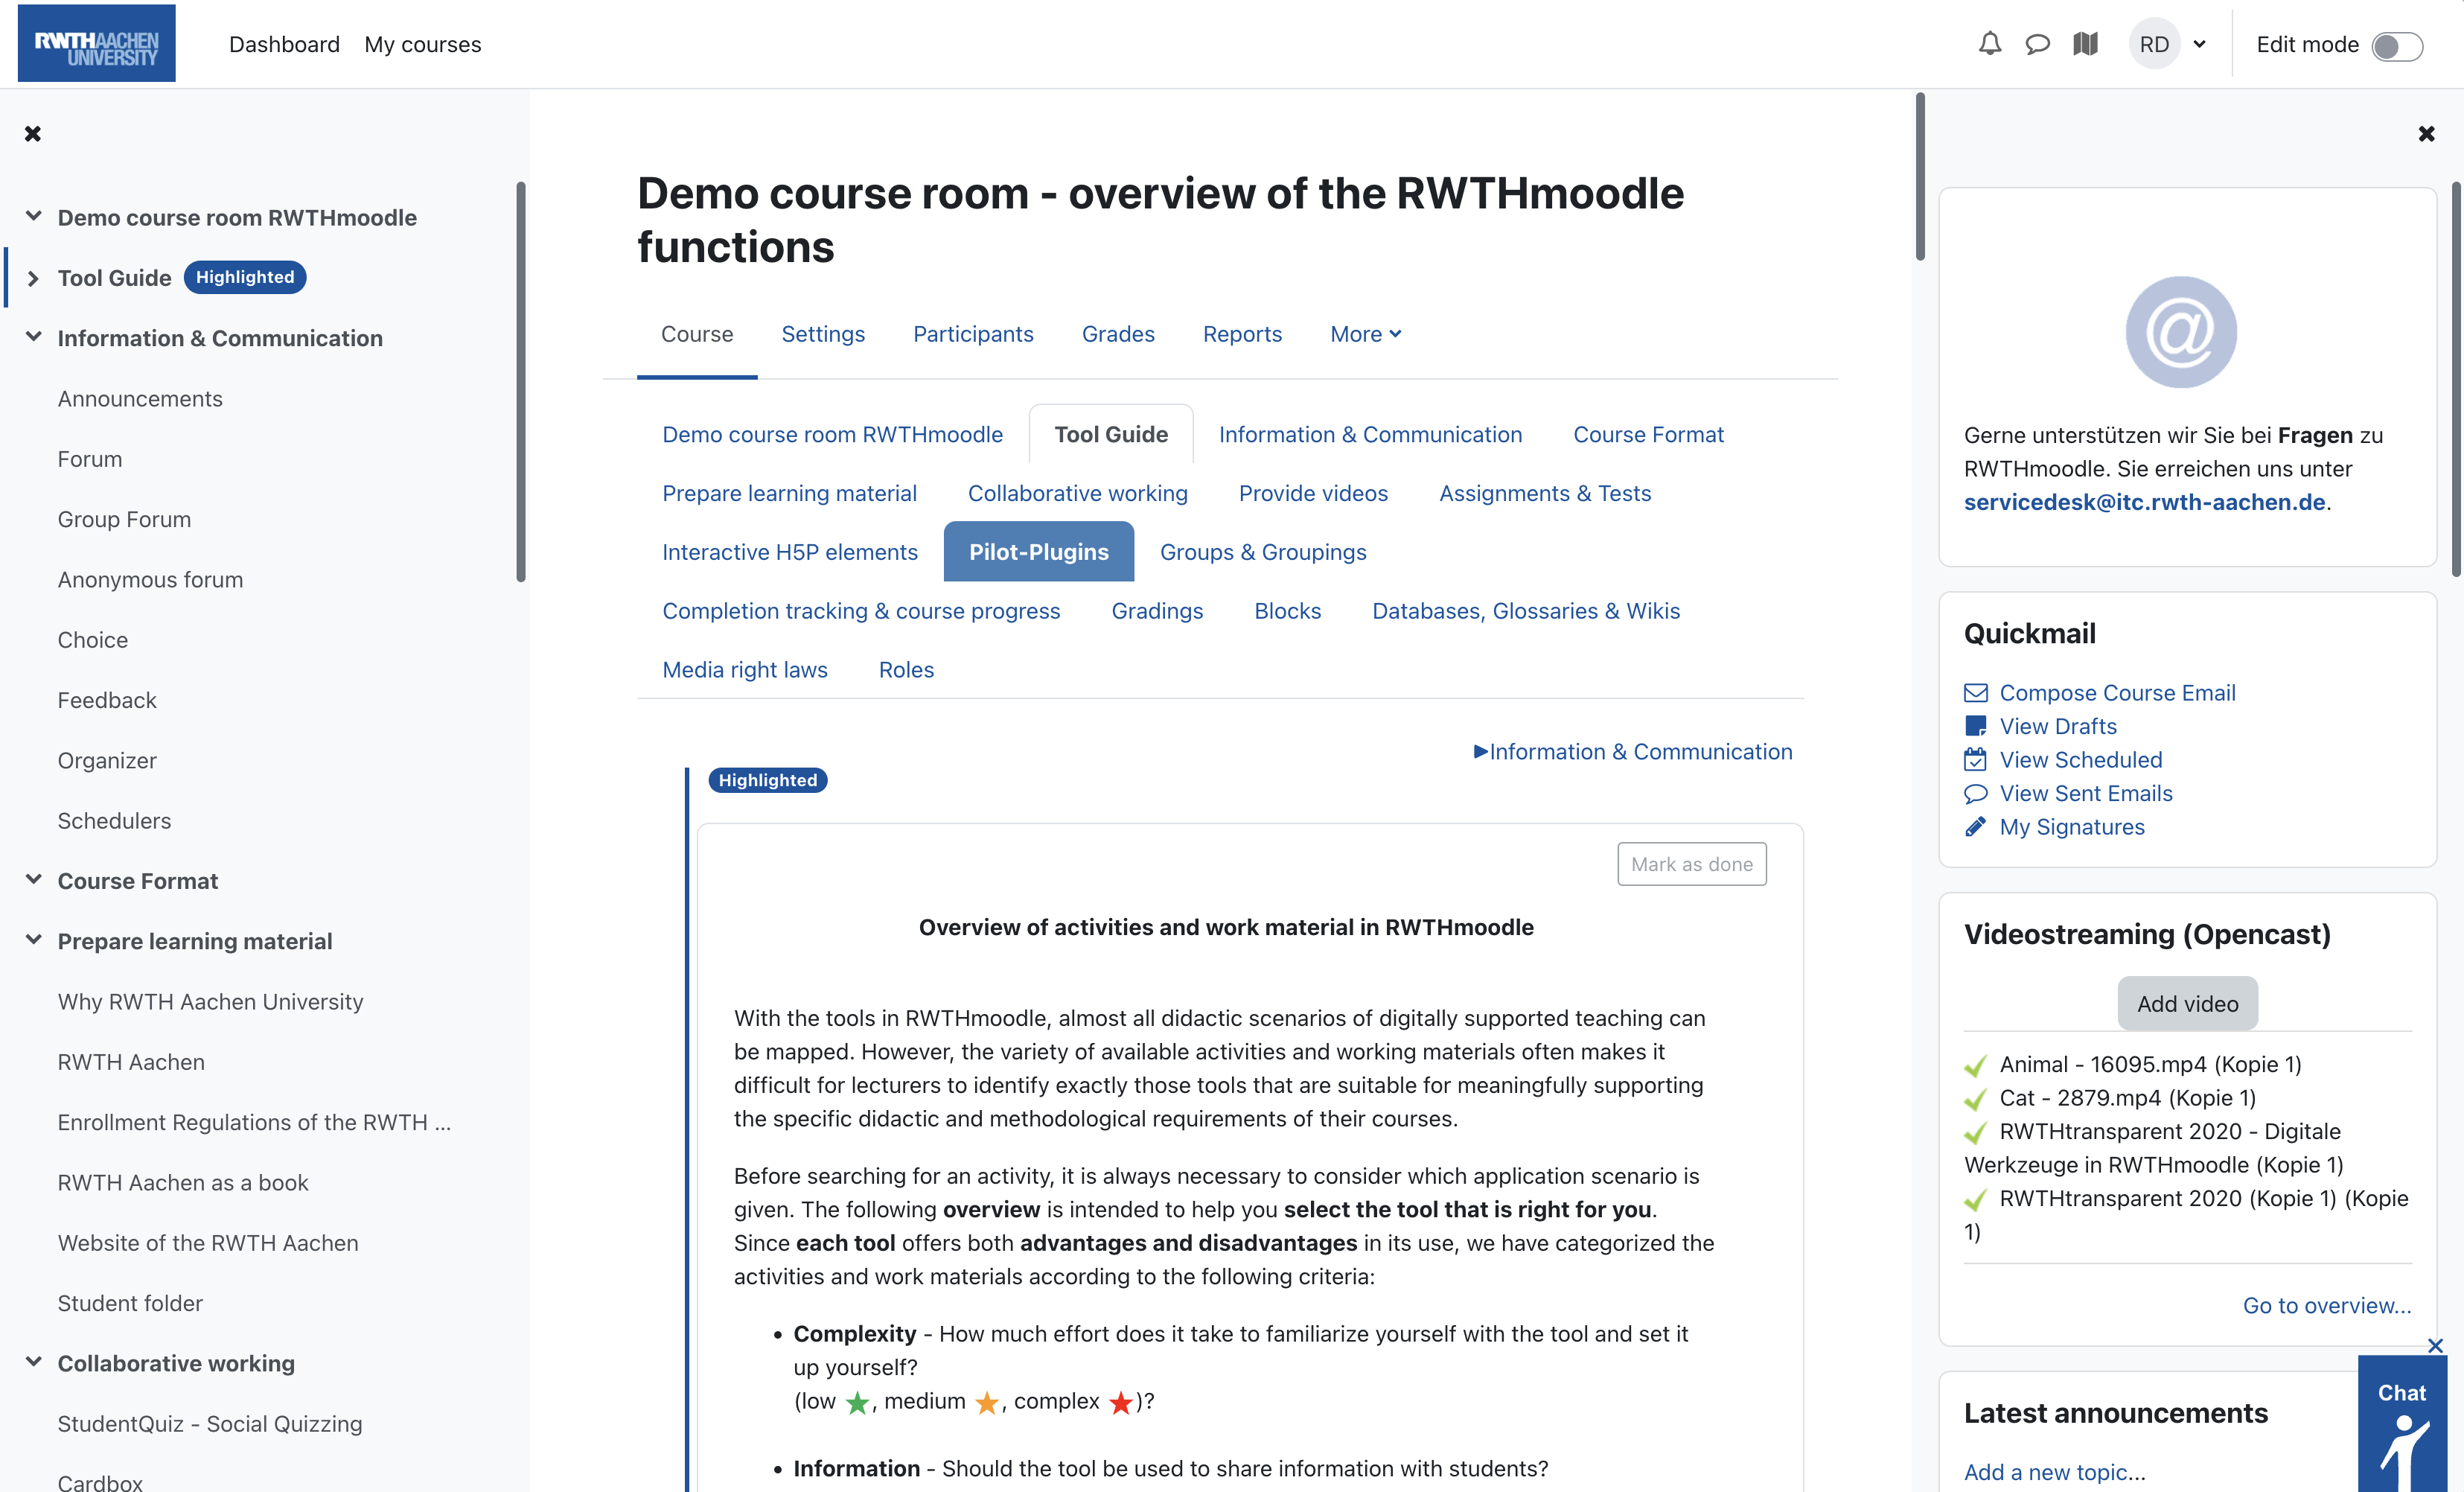 The screenshot shows the course page of the "Demo course room" course. At the top, the menu can be seen. Next to the RWTH Aachen logo you find the two tabs "Dashboard" and "My courses". On the right are icons for notifications, messages, starting a tour, the personal menu and the switch for the edit mode. The screen below is divided into three large areas. On the left is the course index, it lists the various course sections and elements. A small cross above the links allows you to hide this area. The middle section shows the course content, the course name, here the horizontal menu, the tabs with the existing course sections and the currently selected content "Tool Guide". The block area is displayed on the right, this can also be hidden using a cross symbol. The blocks "Support", "Quickmail", "Videostreaming (Opencast)", and "Latest announcements" can be seen. At the bottom right is a small overlay which can be used to start a chat with the ServiceDesk.